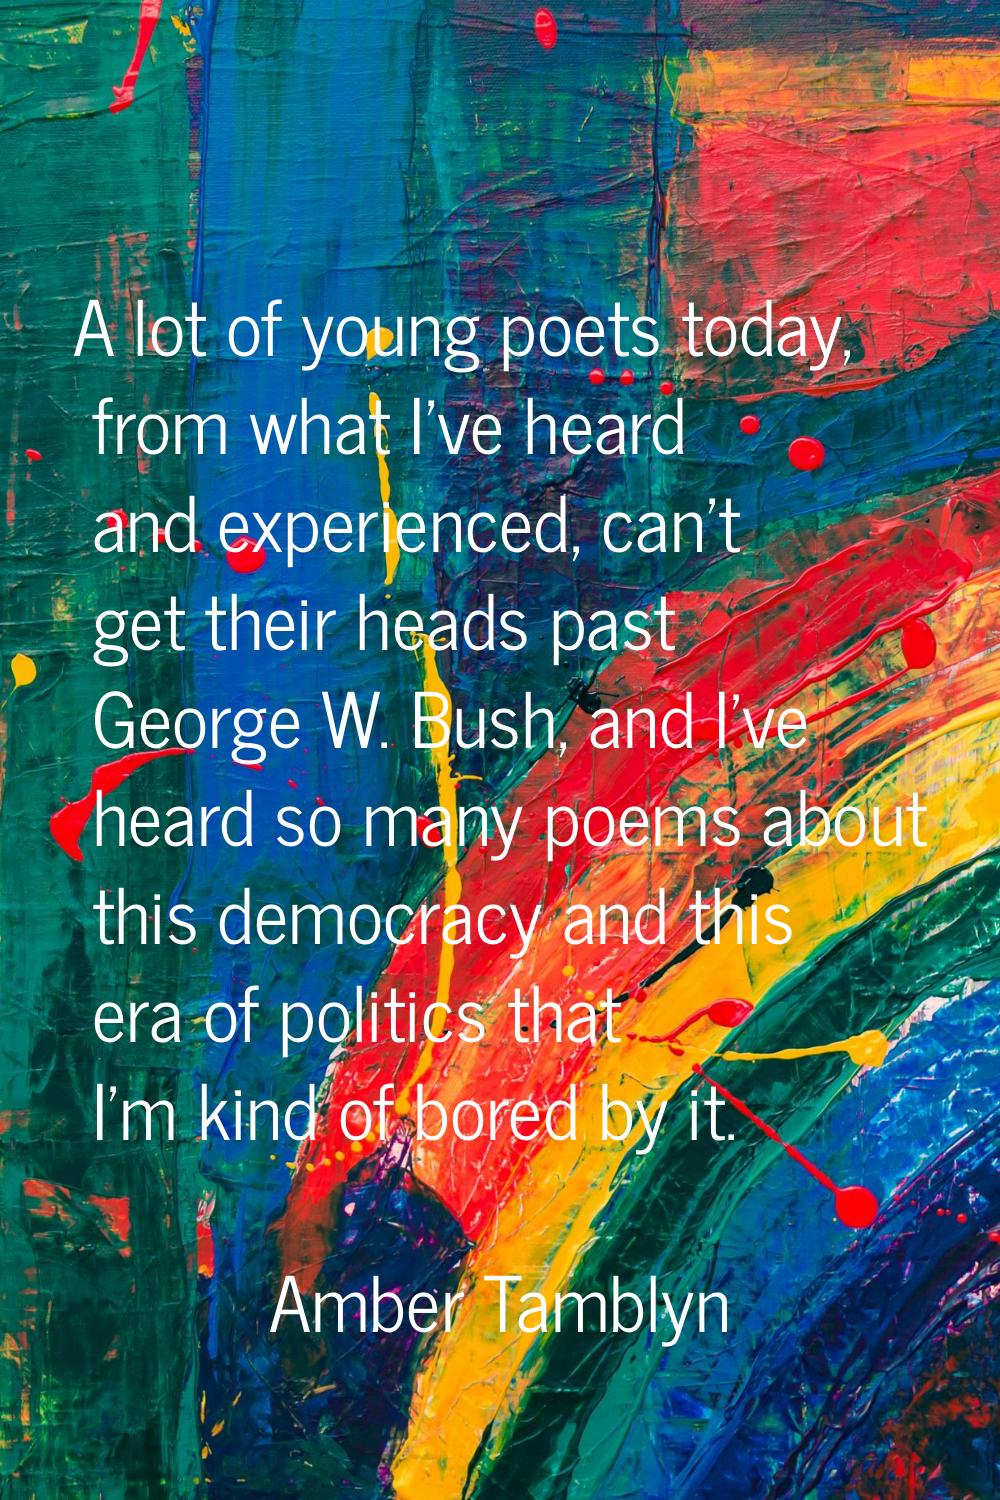 A lot of young poets today, from what I've heard and experienced, can't get their heads past George